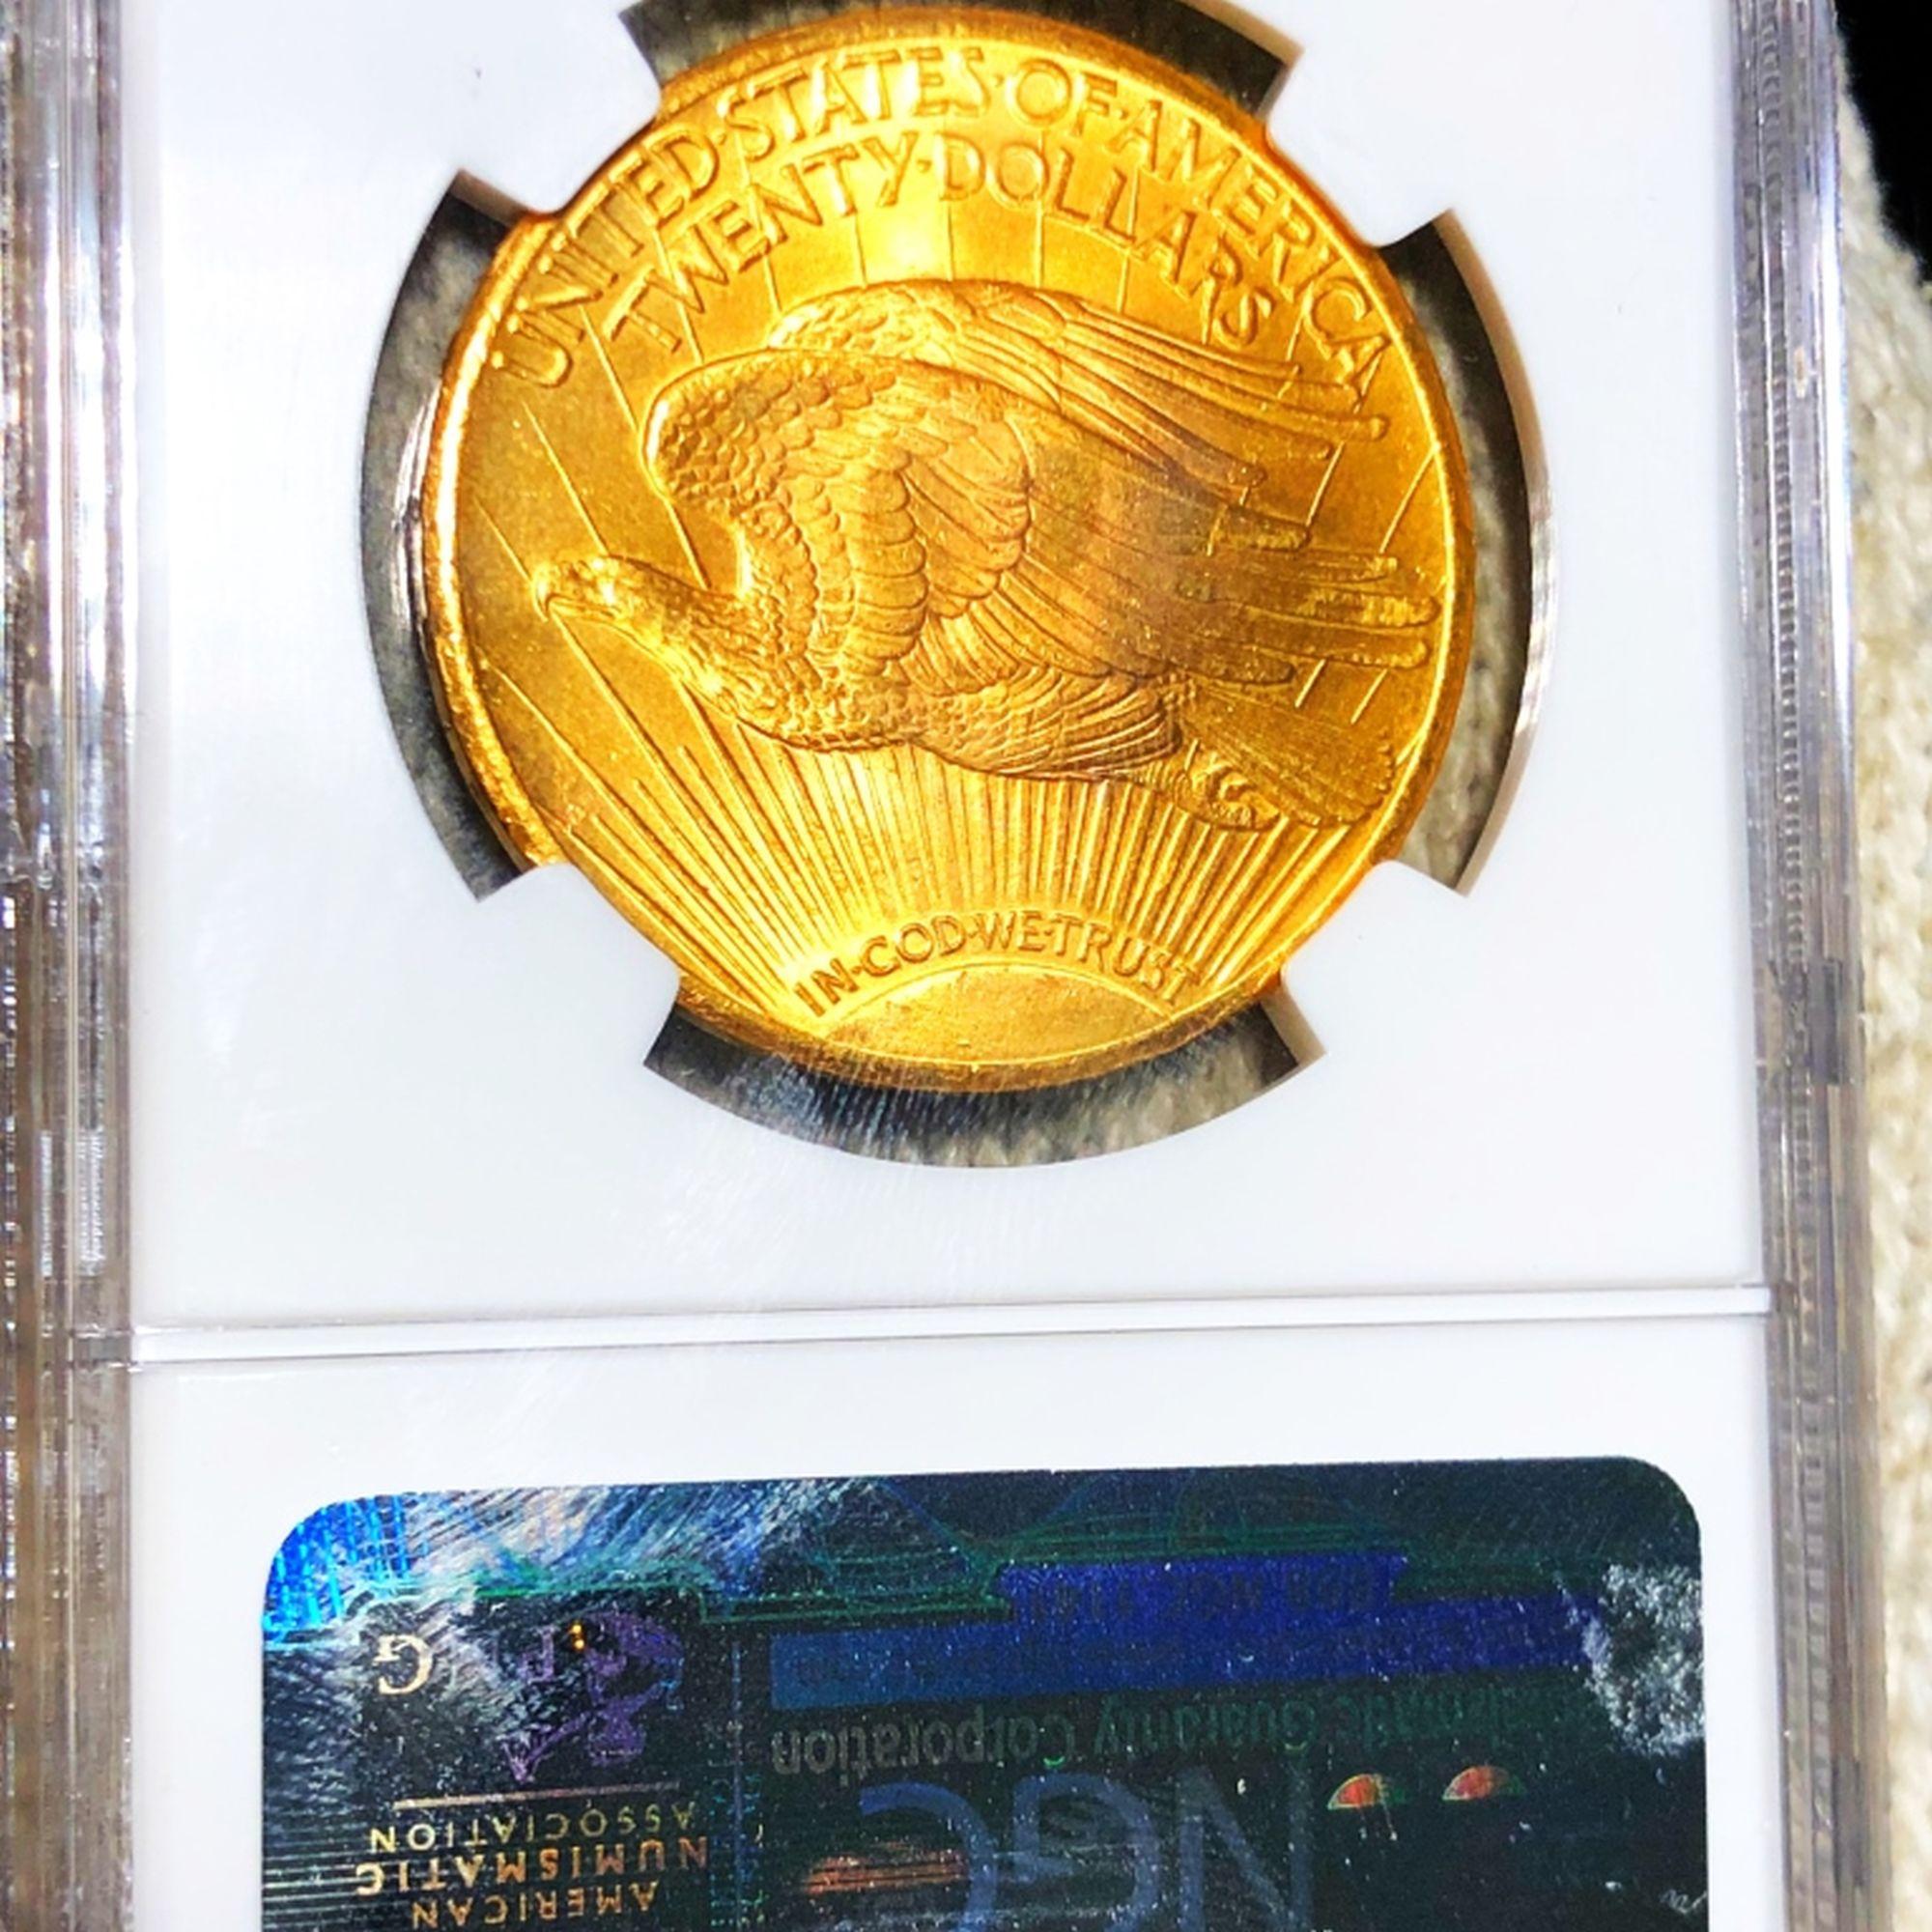 1927 $20 Gold Double Eagle NGC - MS64